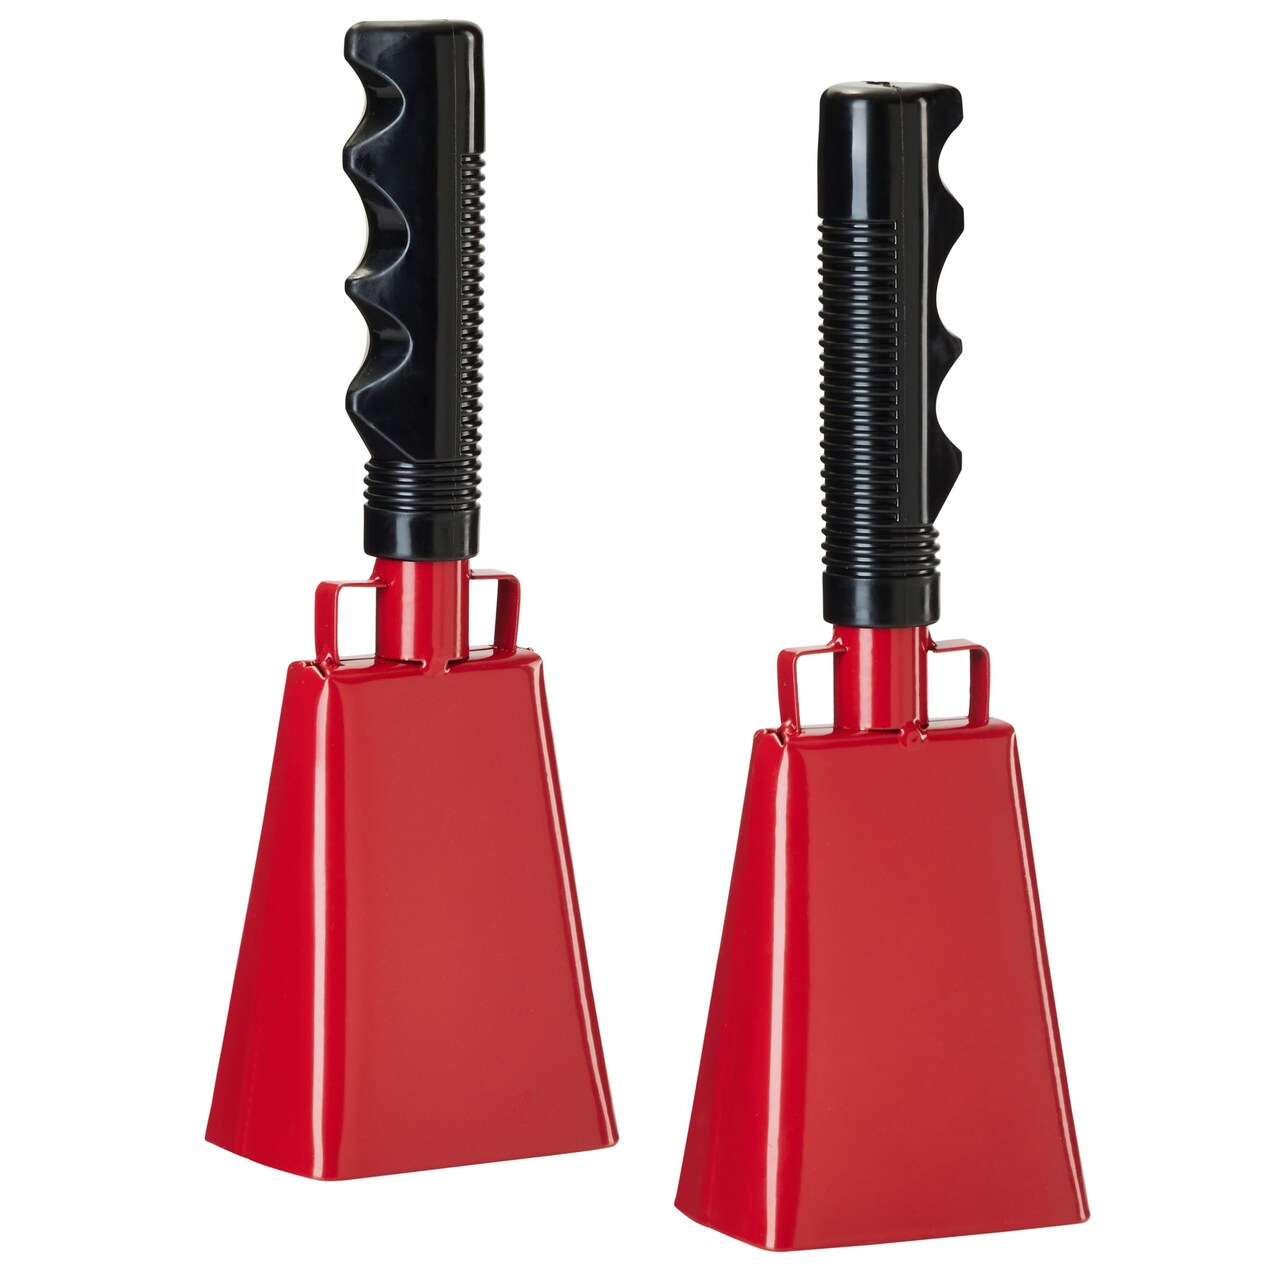 2 Pack 9-inch Cowbells for Sporting Events, Percussion Noise Makers with  Handle for Football Games, Stadiums (Red)